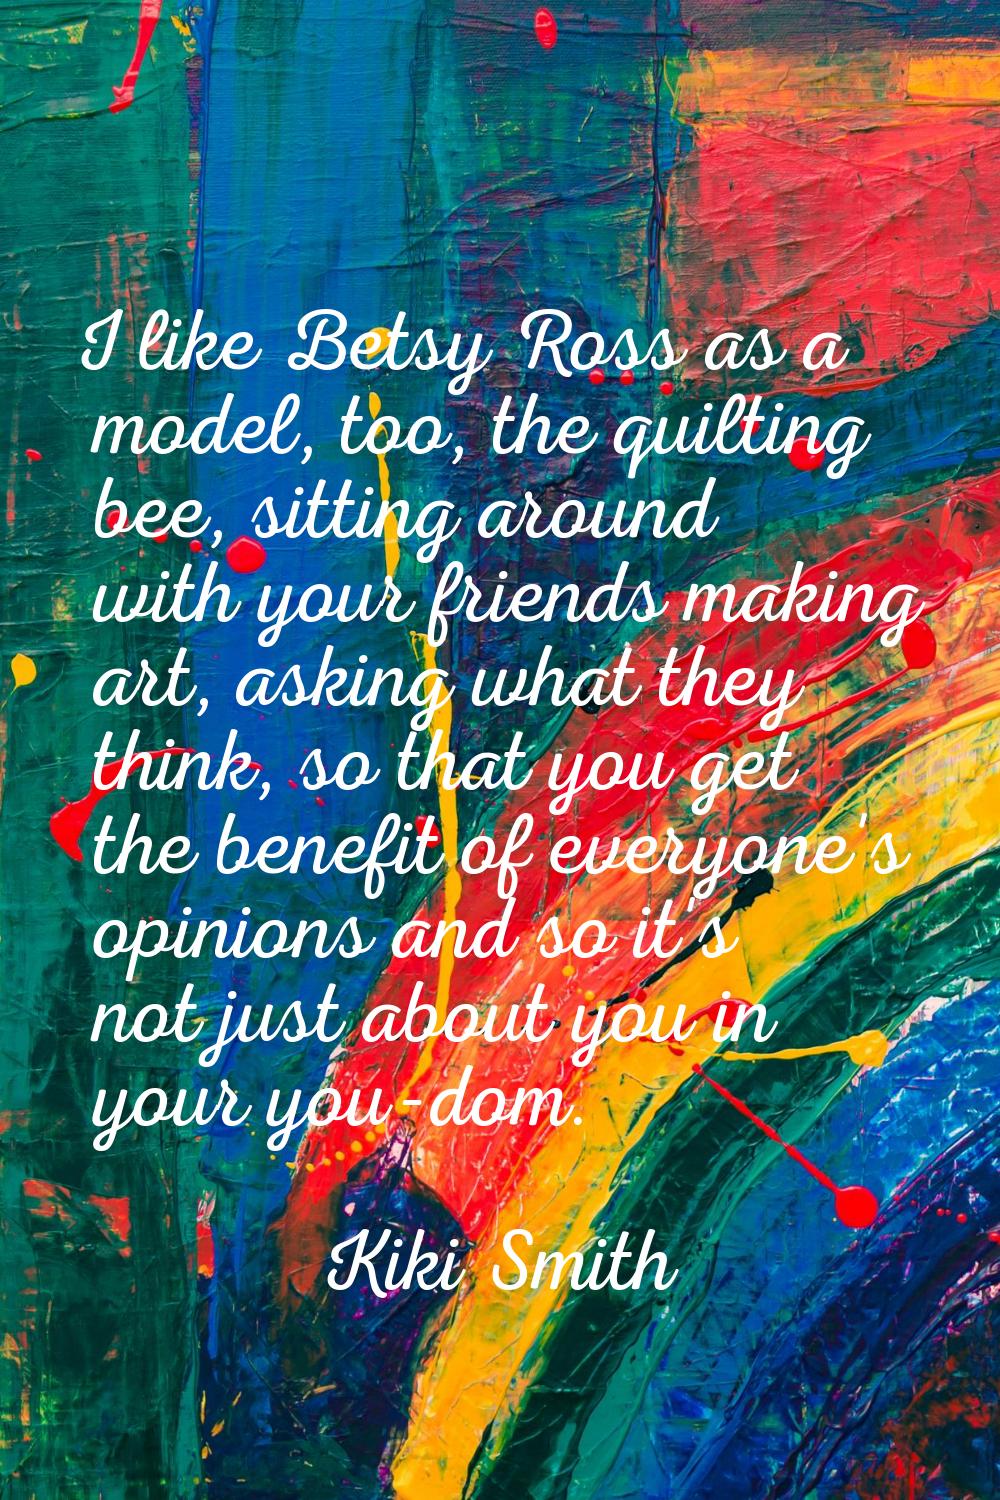 I like Betsy Ross as a model, too, the quilting bee, sitting around with your friends making art, a